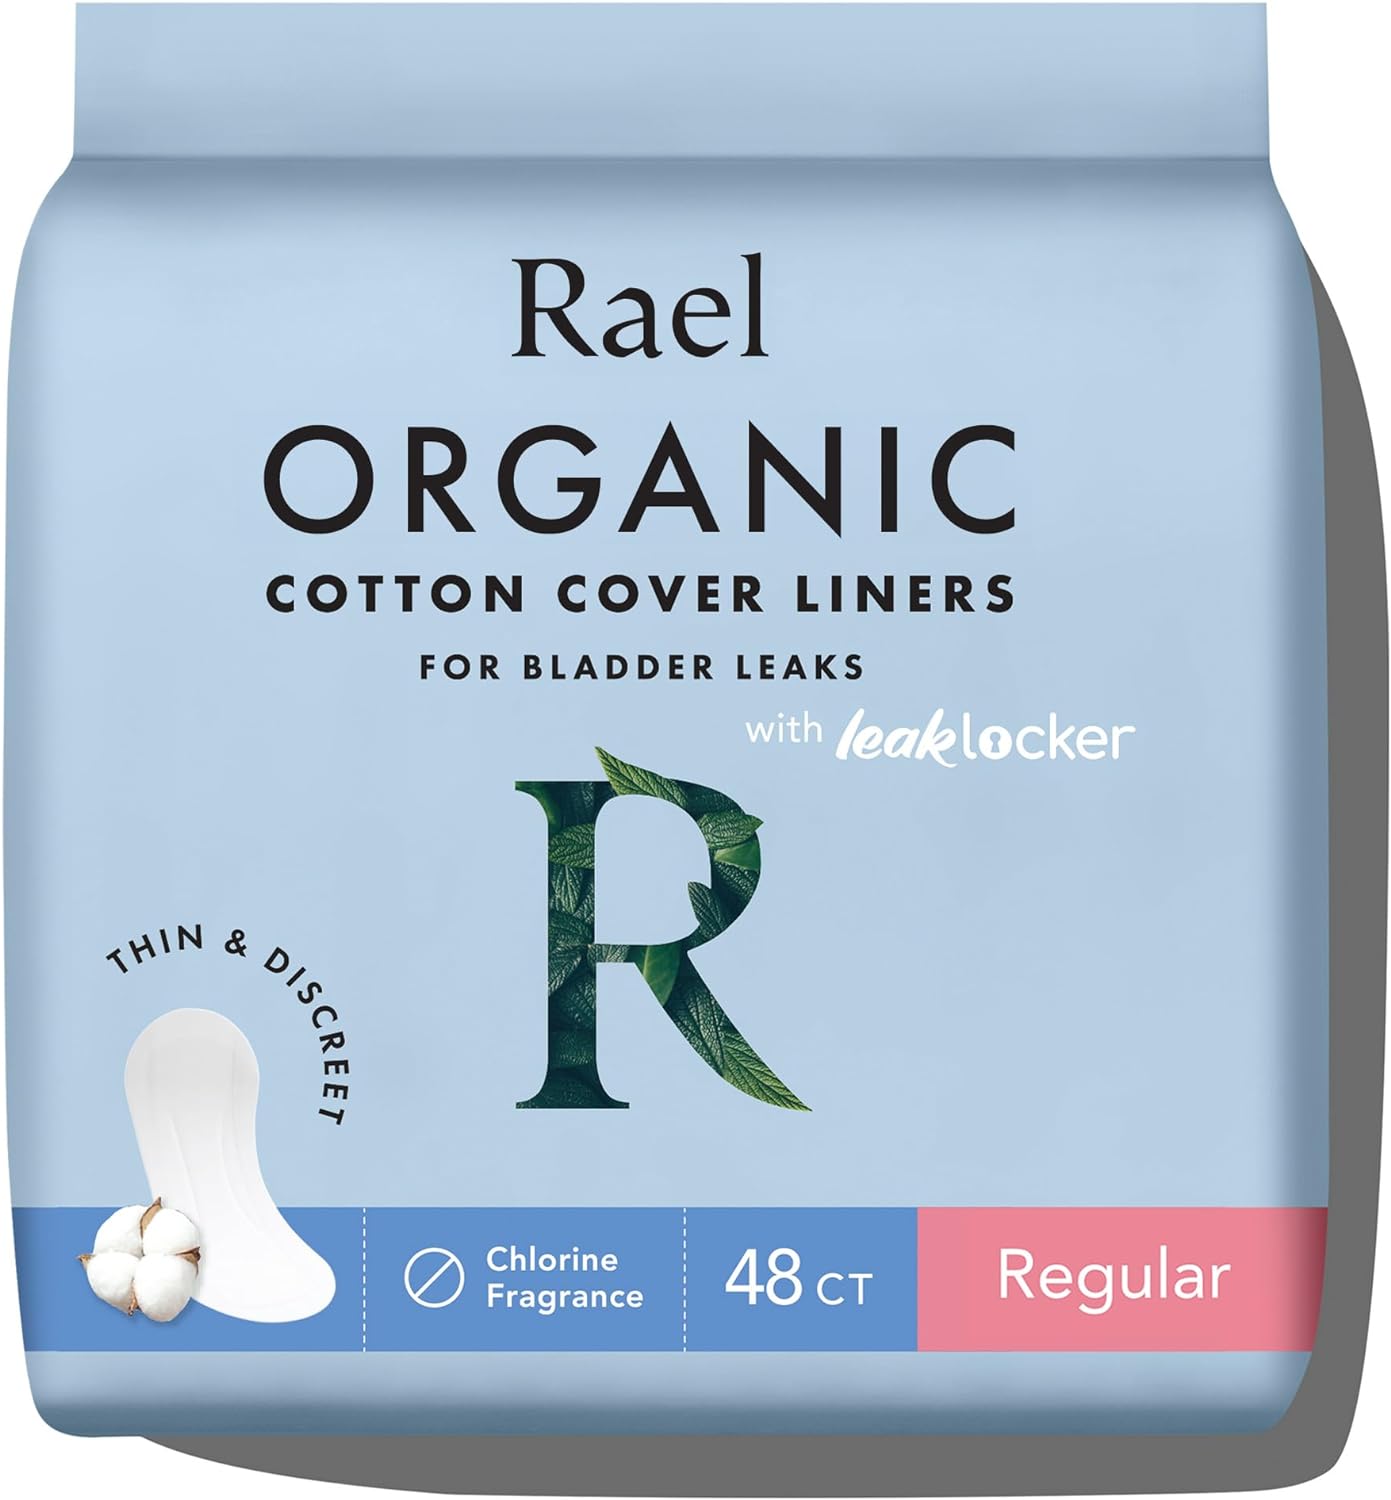 Rael Incontinence Liners for Women, Organic Cotton Cover - Postpartum Essential, Regular Absorbency, Bladder Leak Control, 4 Layer Core with Leak Guard Technology, (Regular, 48 Count)